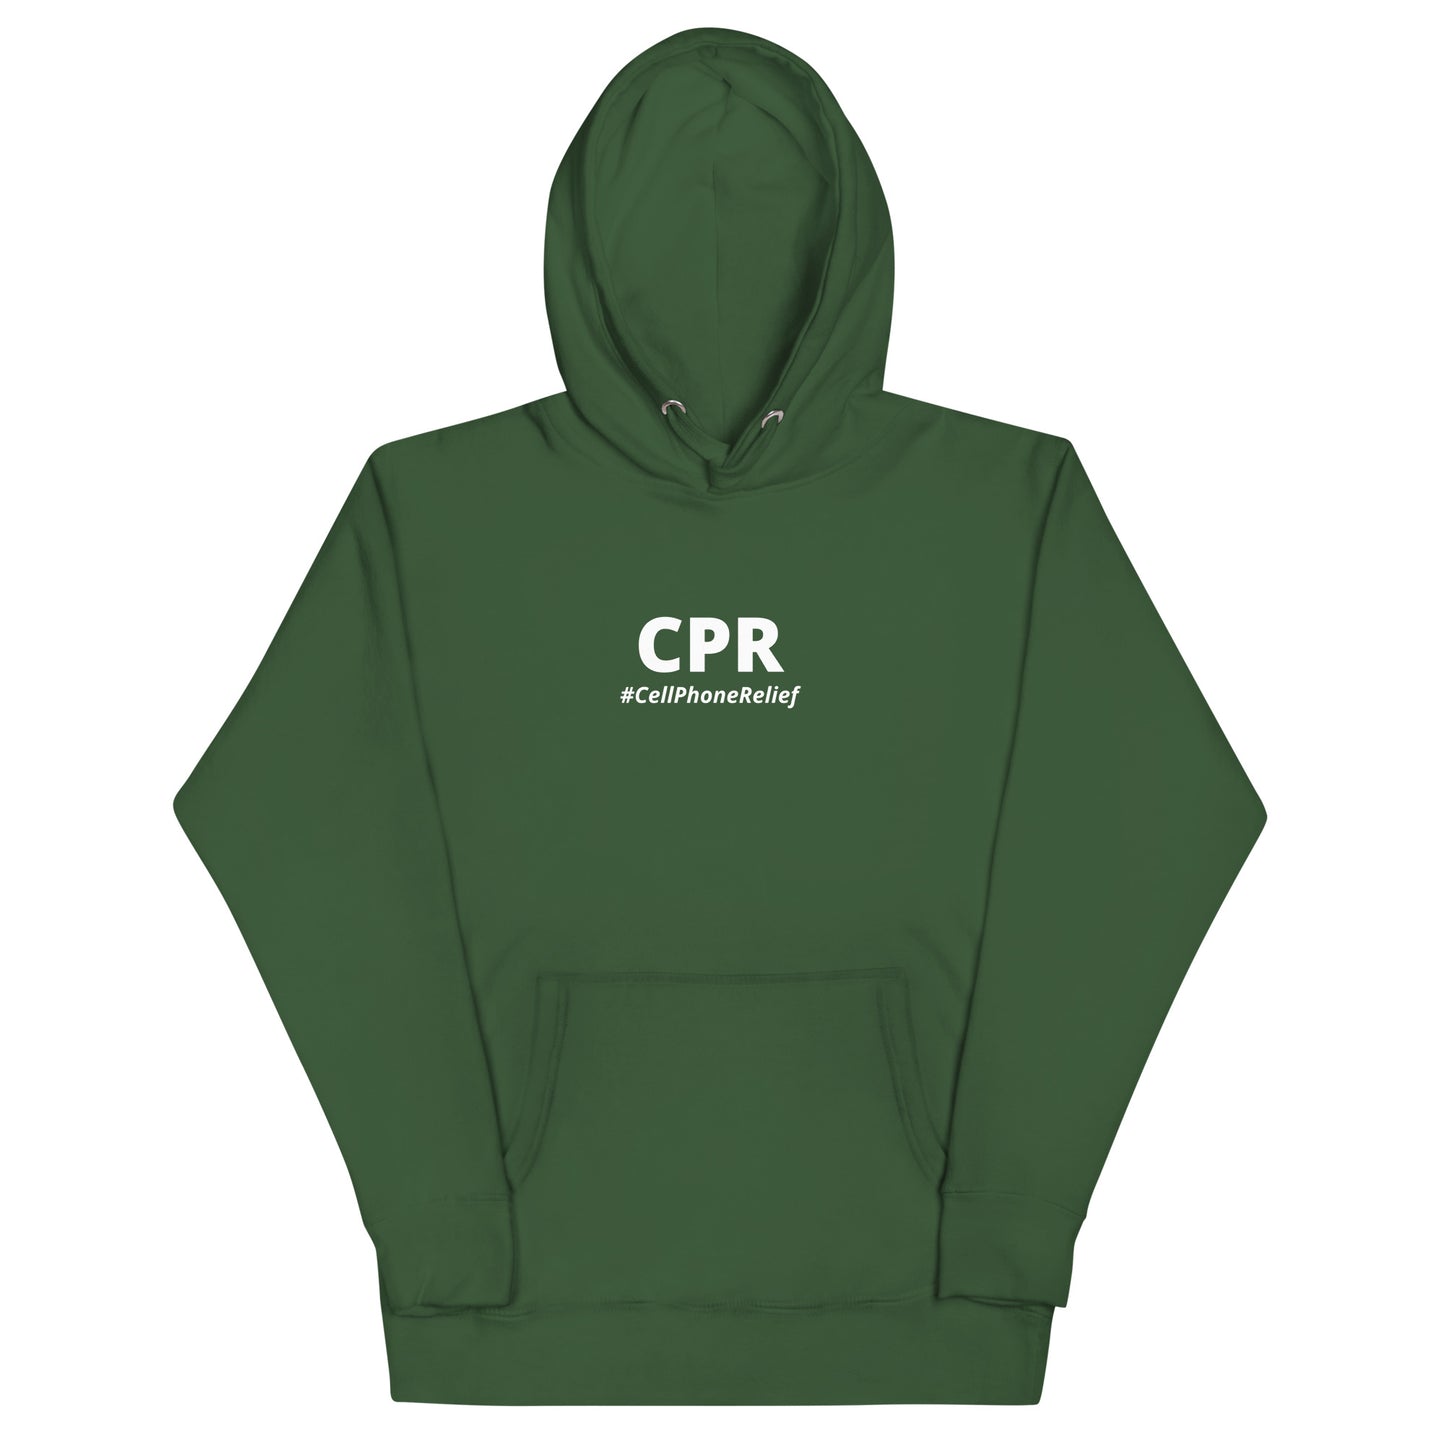 CPR (Cell Phone Relief) Unisex Hoodie